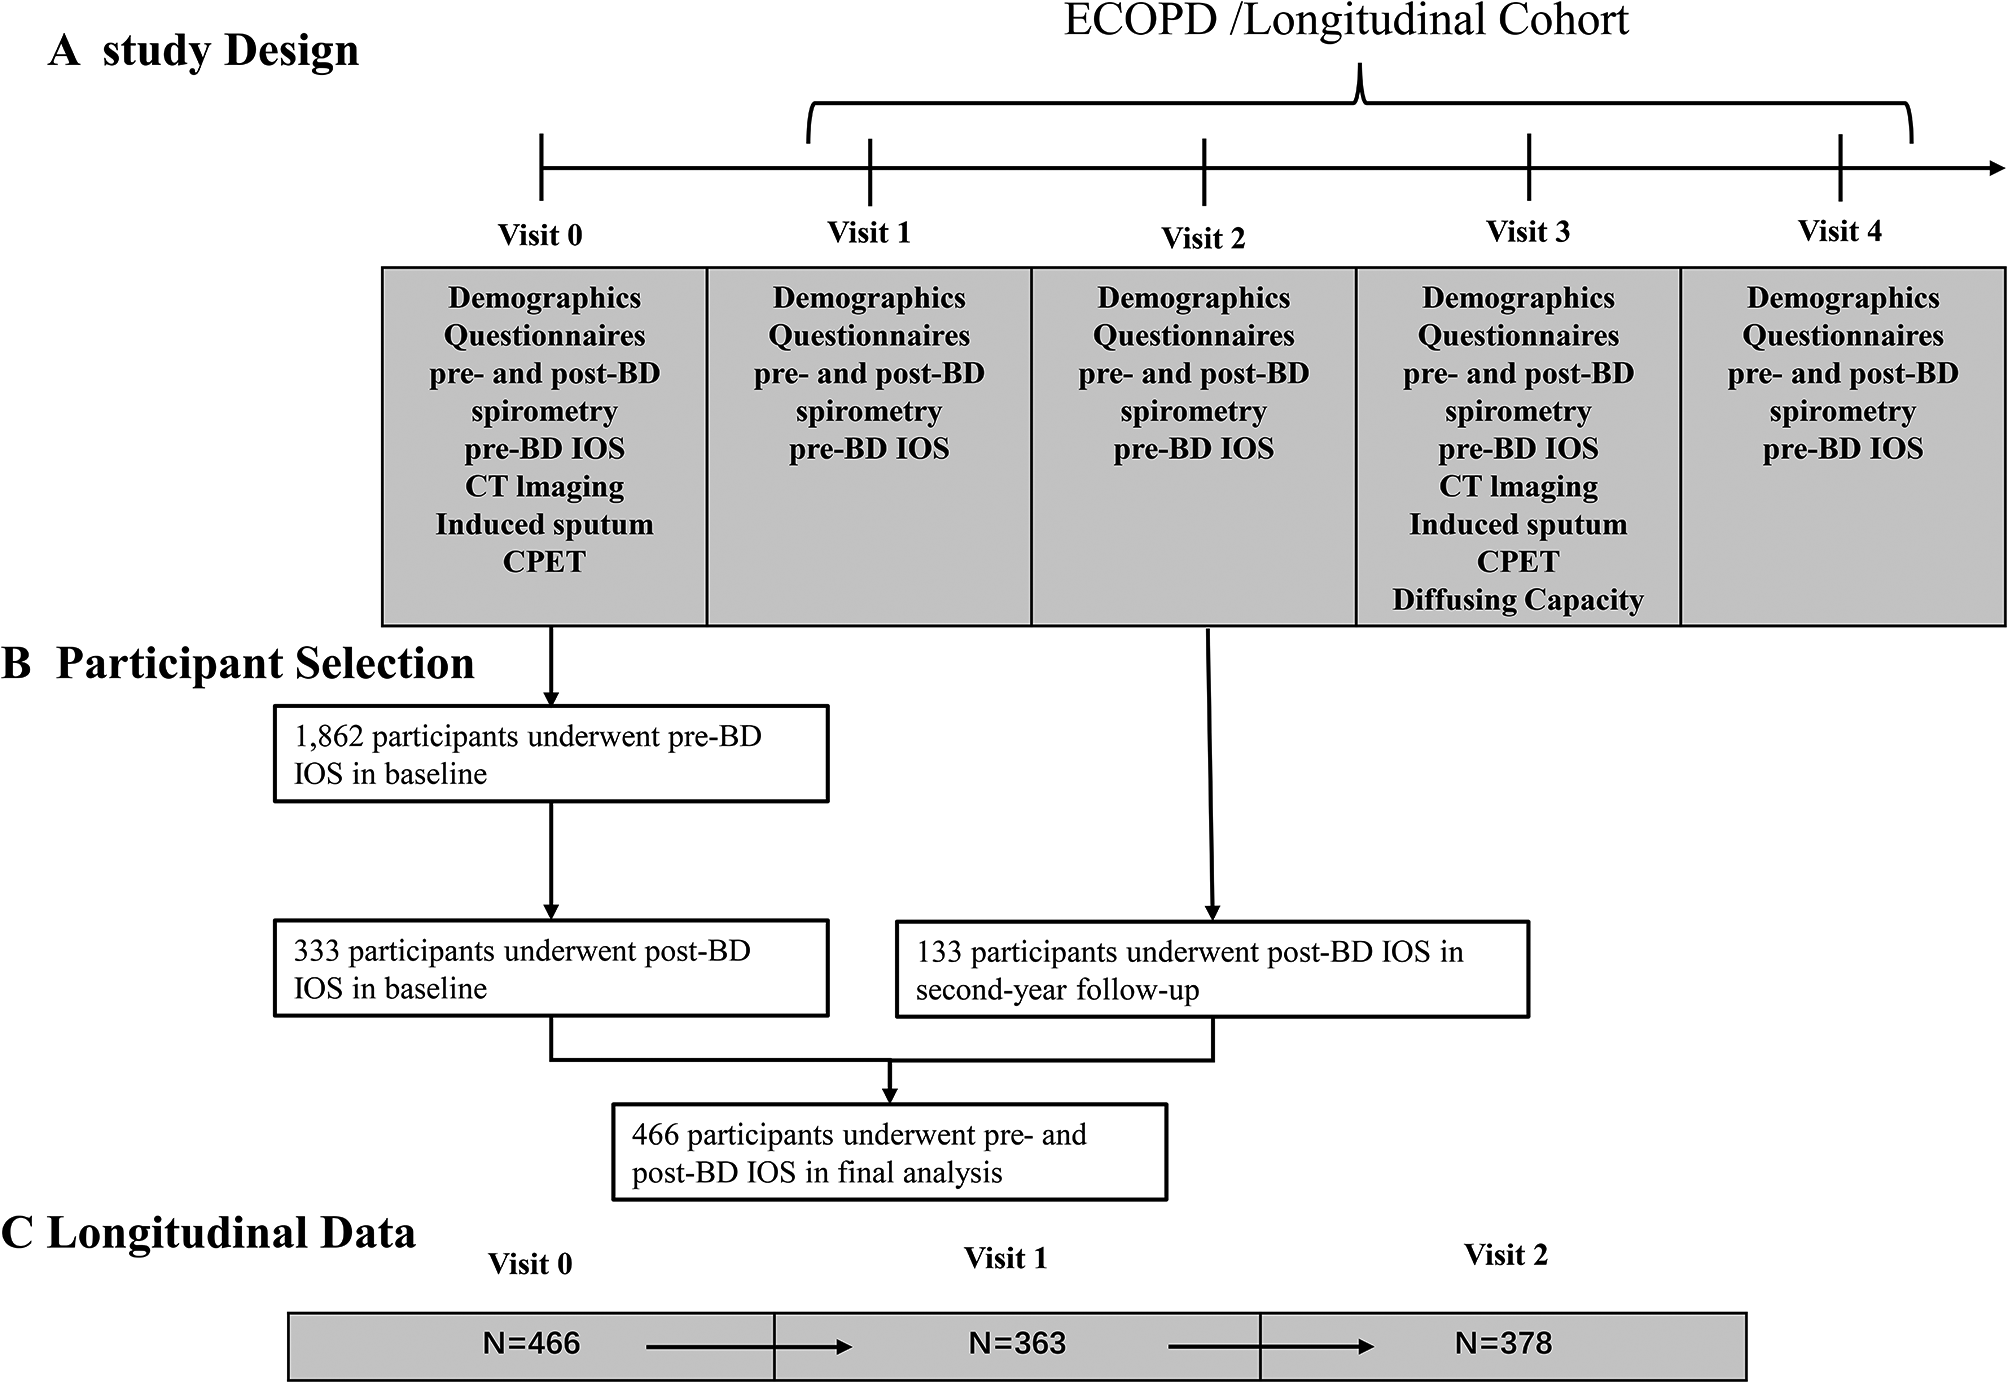 Clinical characterization and outcomes of impulse oscillometry-defined bronchodilator response: an ECOPD cohort-based study